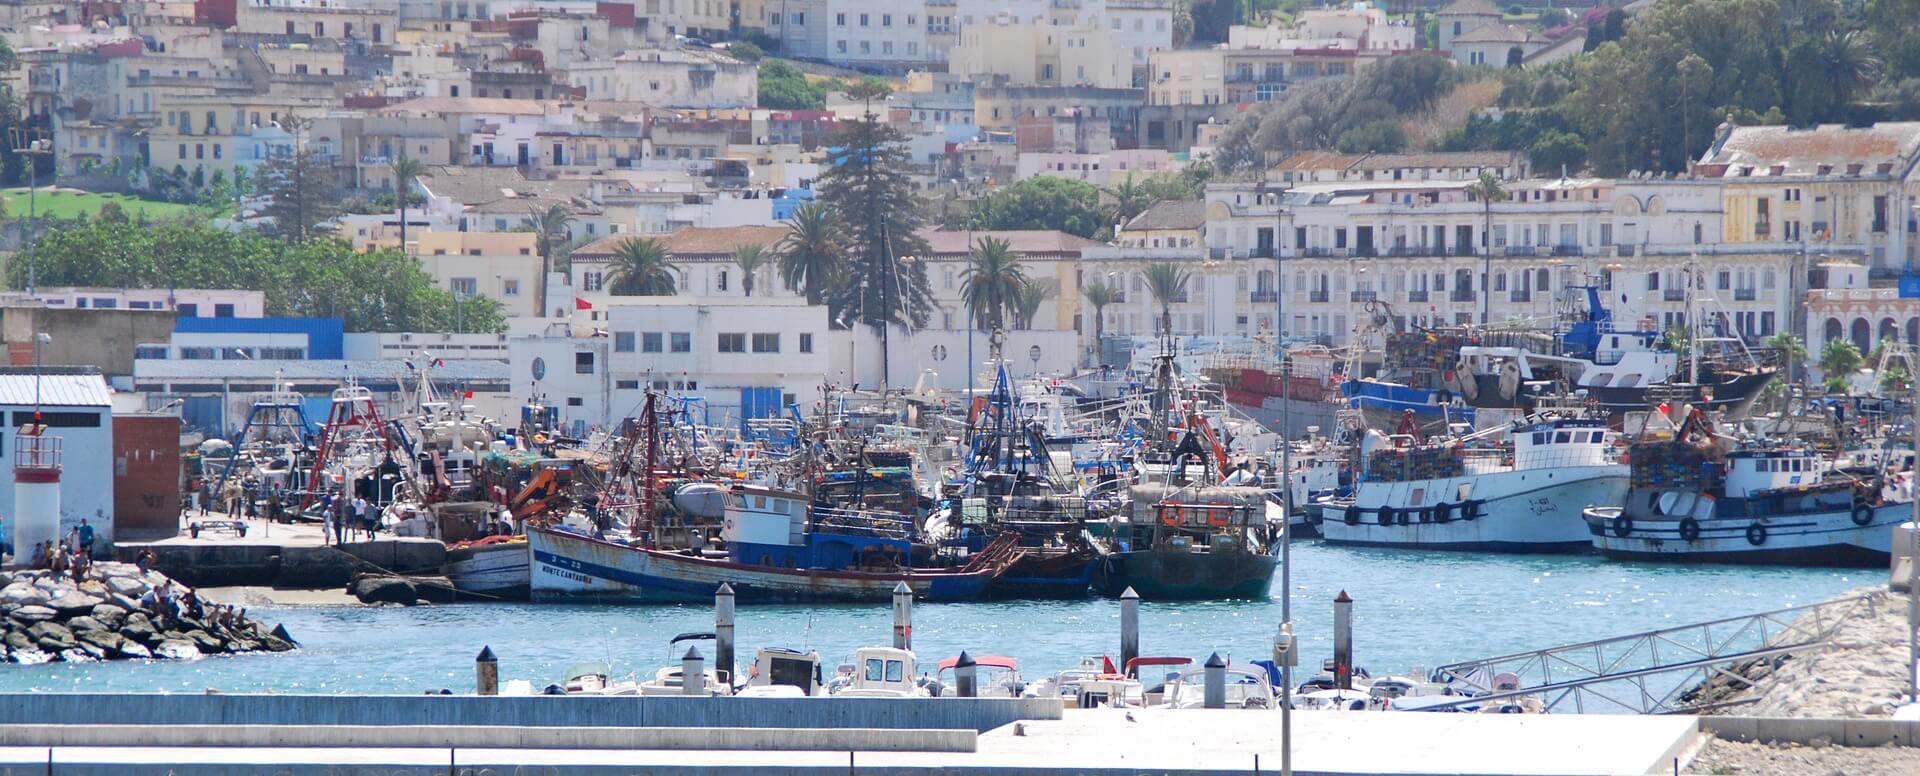 2. The city of Tangier - Morocco